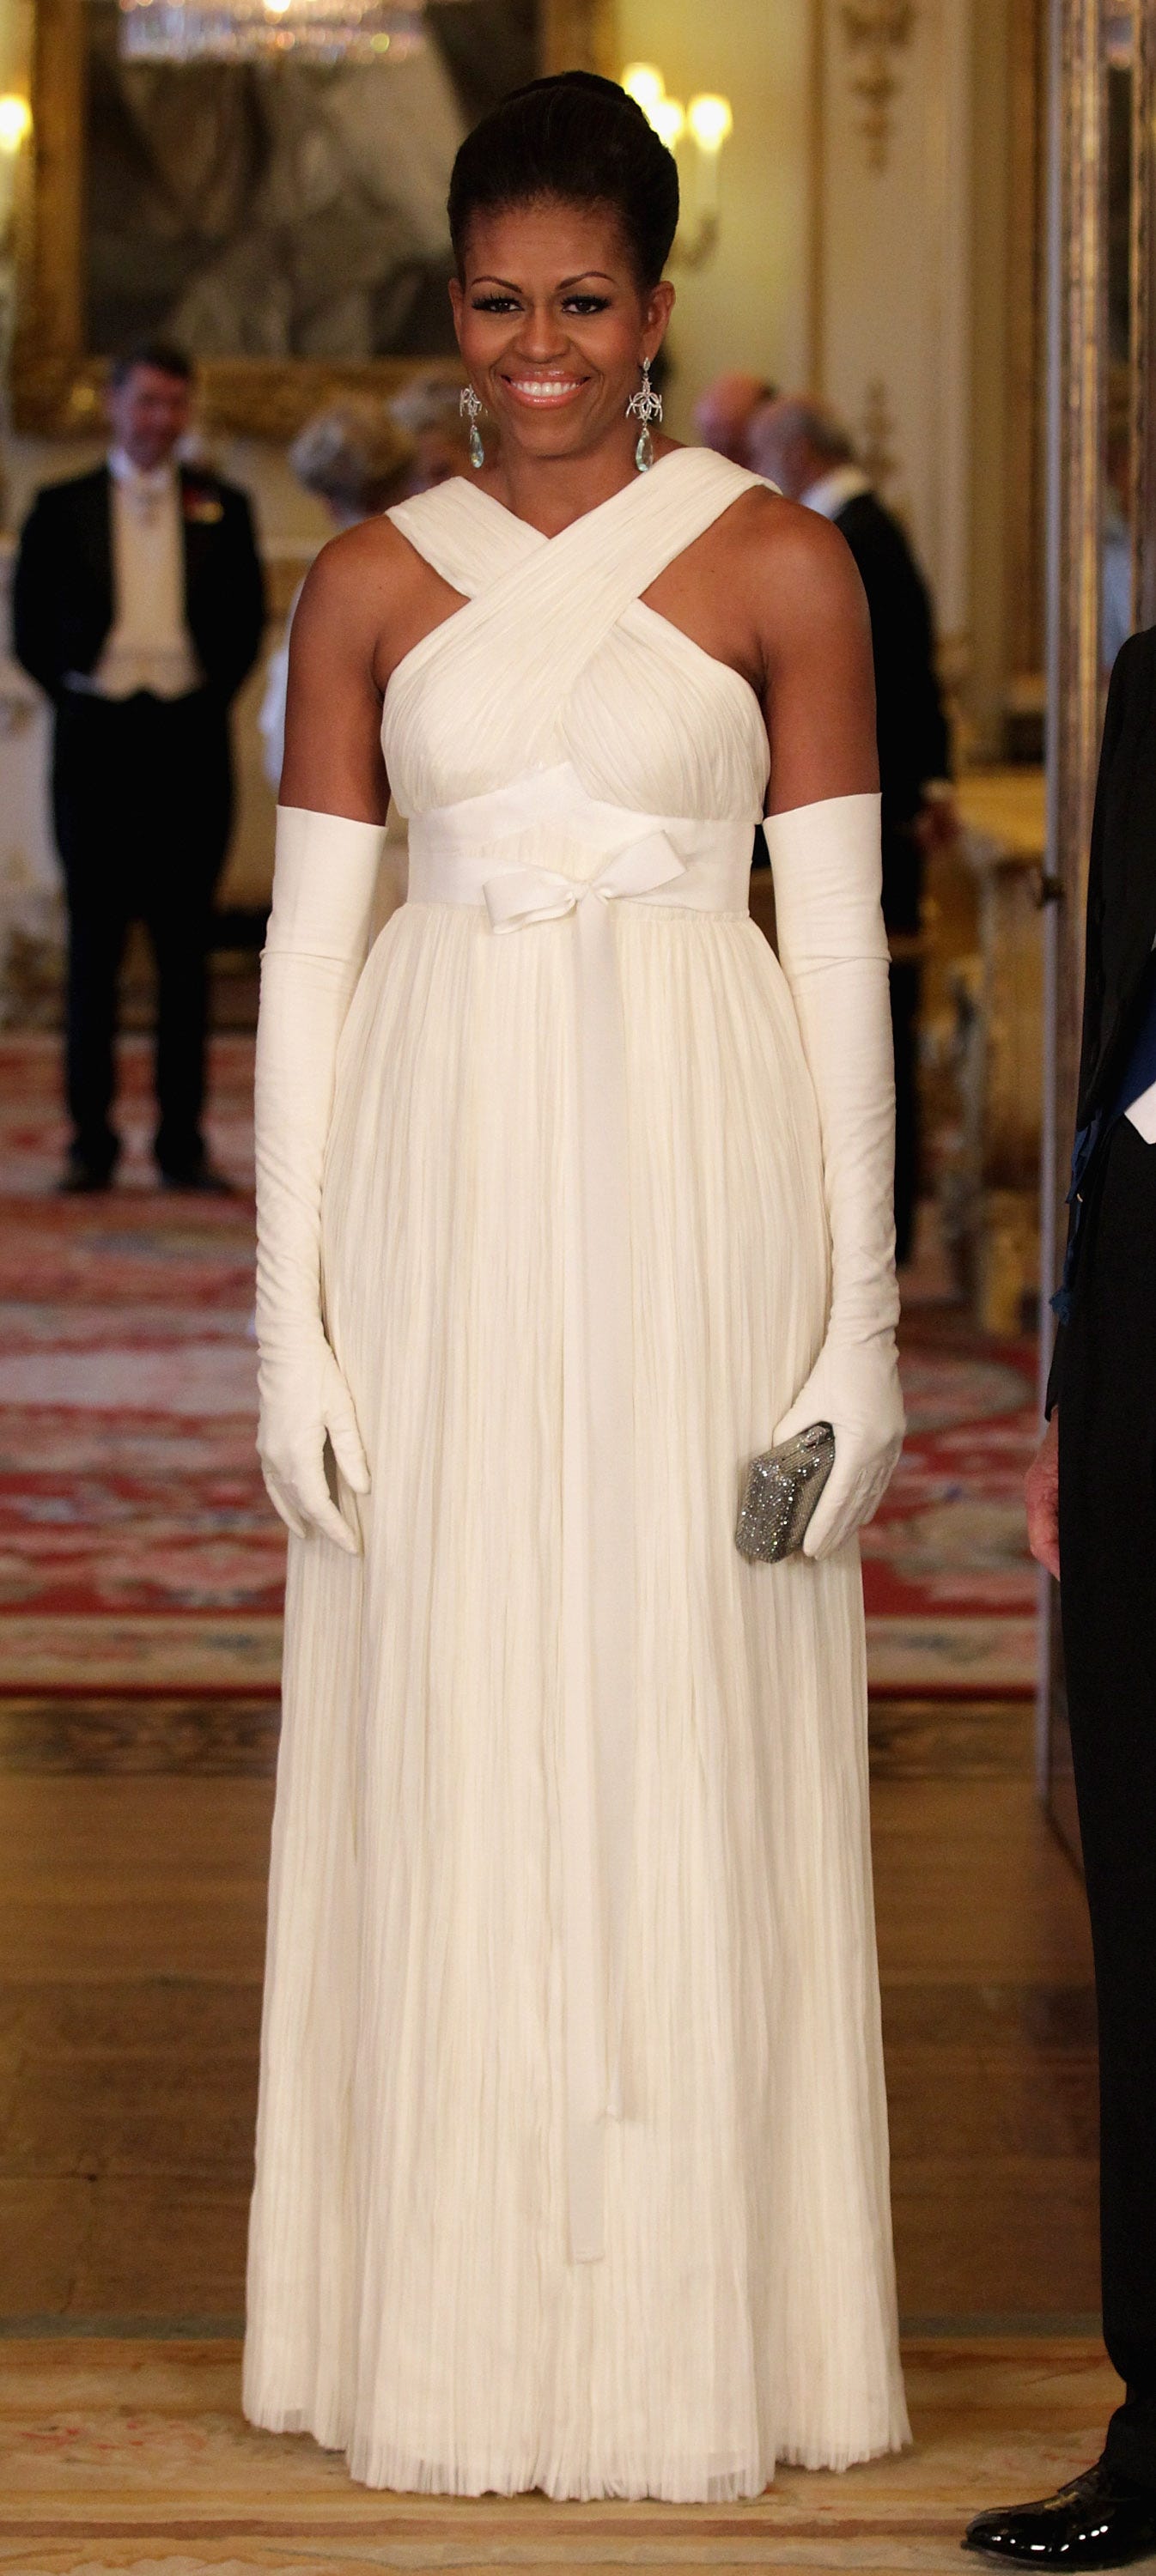 Michelle Obama wears white Tom Ford gown to palace